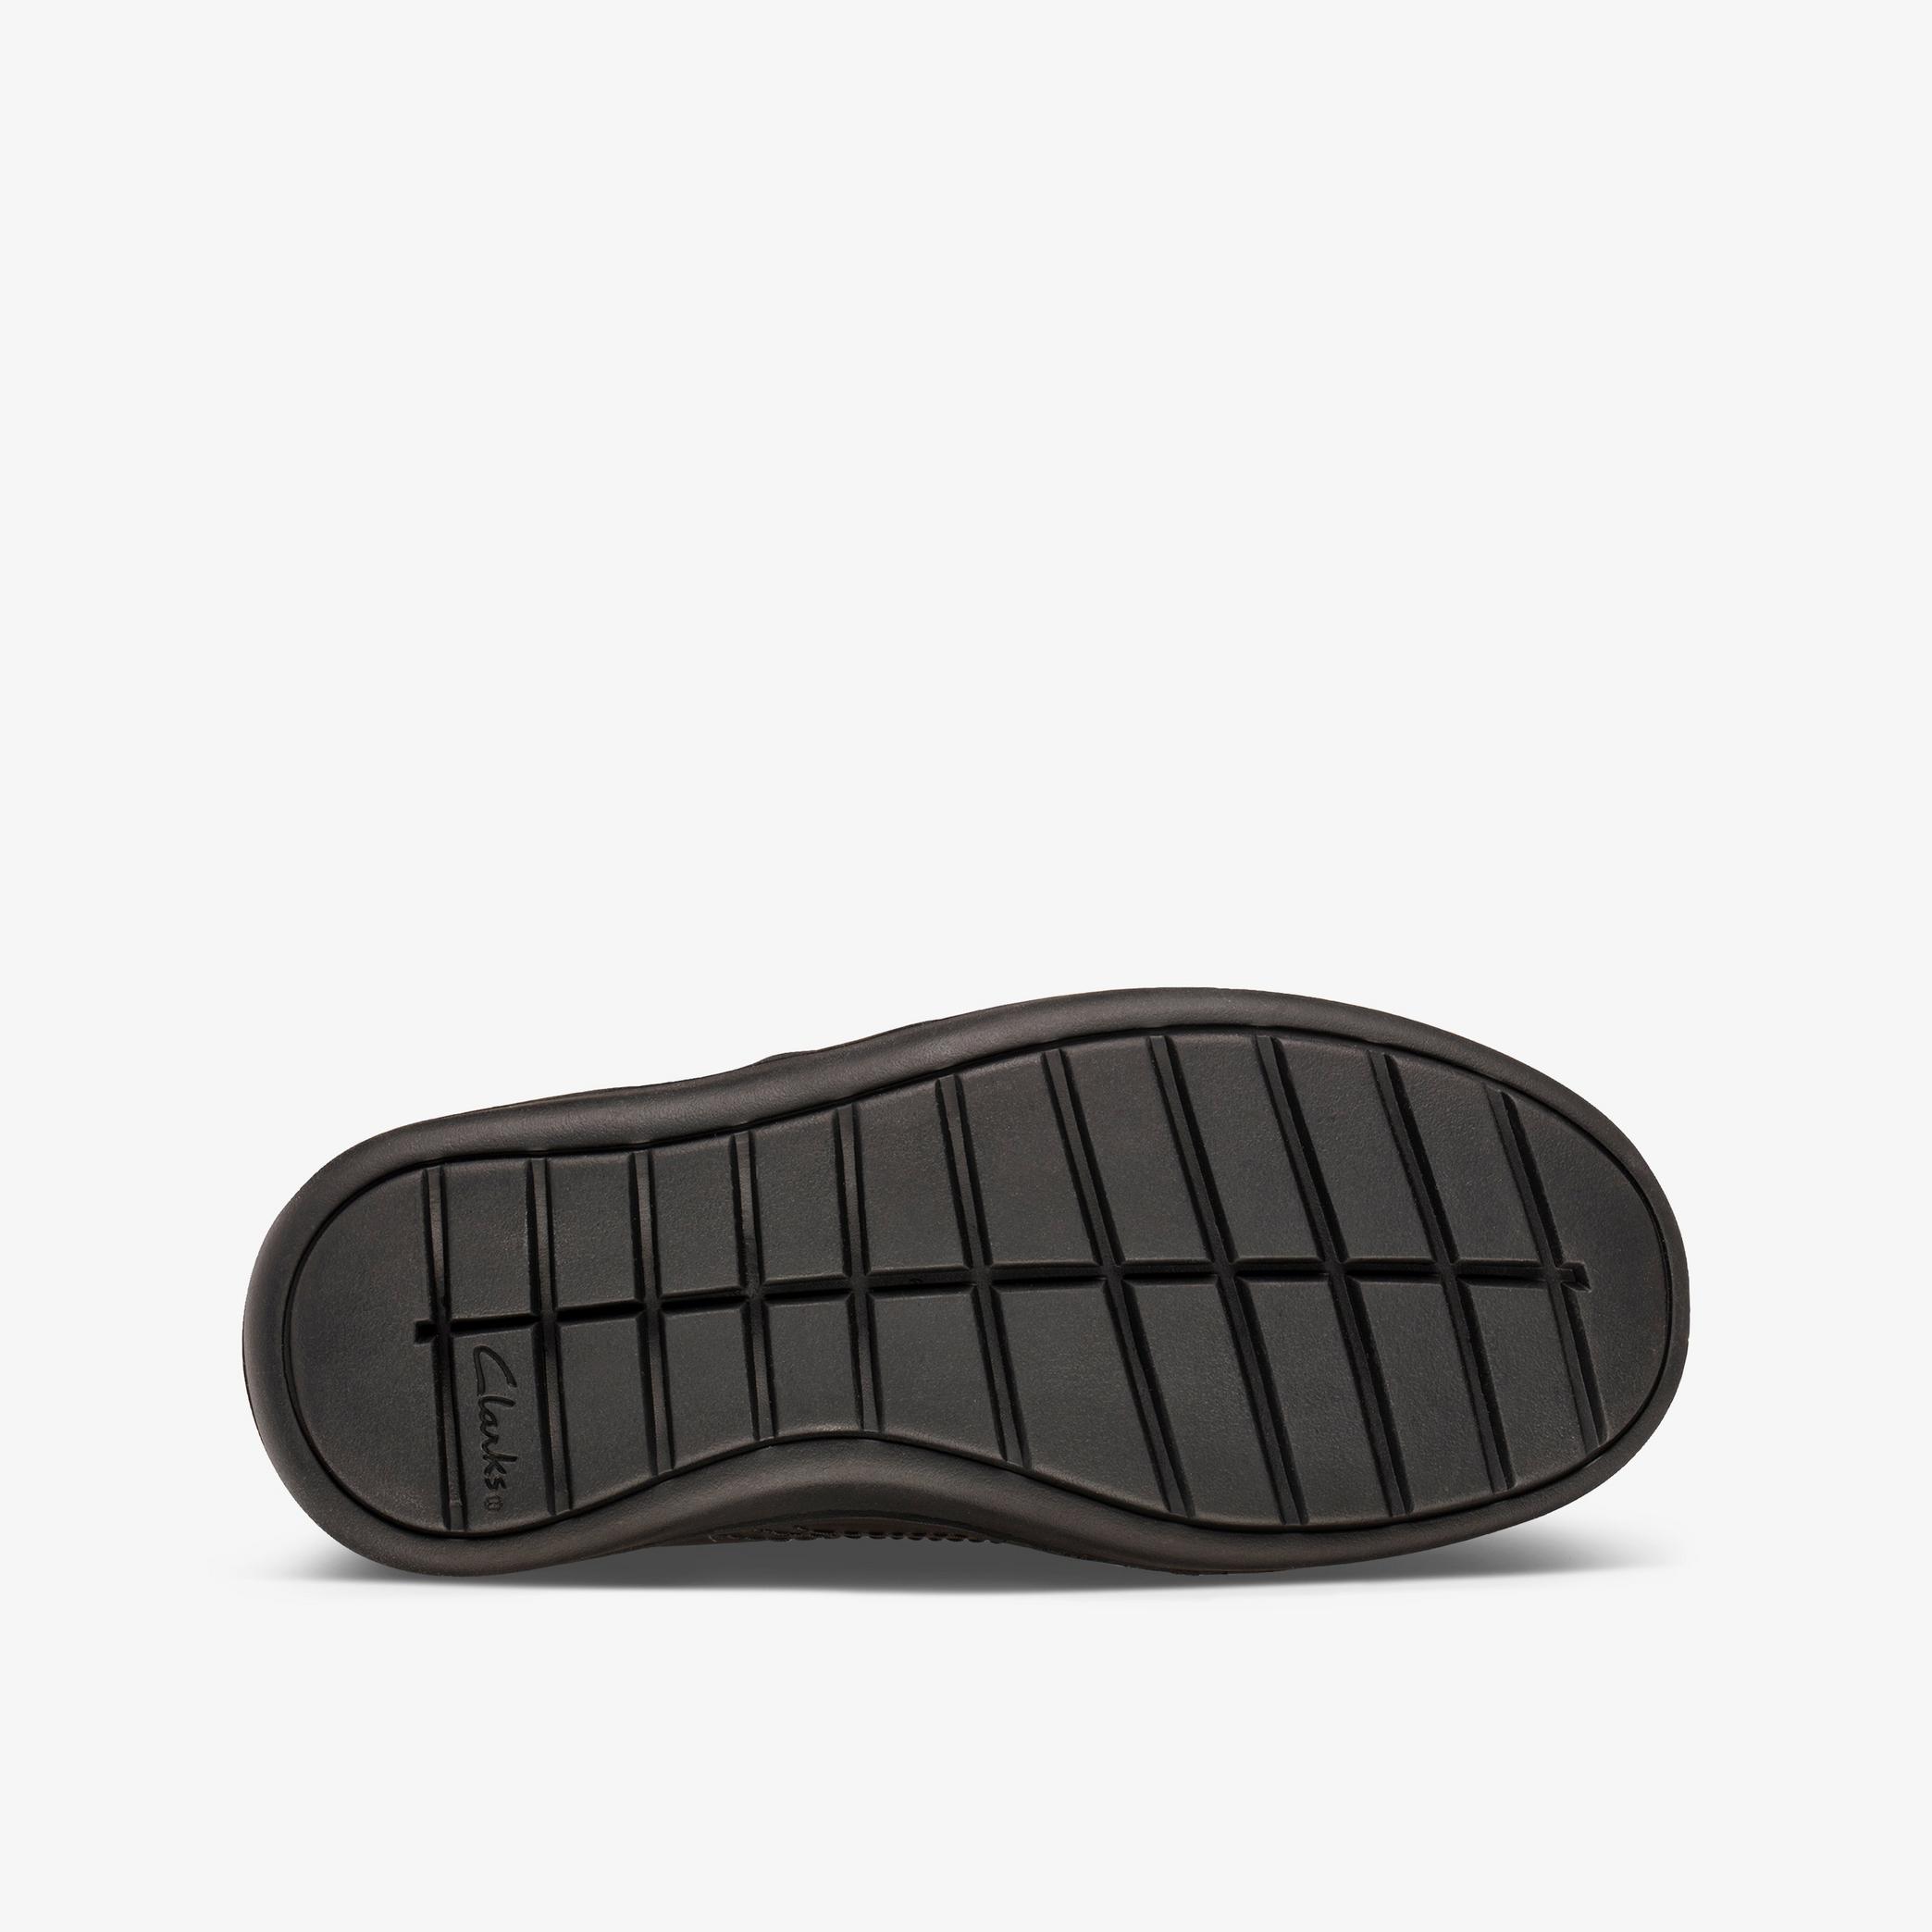 BOYS Rock Pass Kid Black Leather Shoes | Clarks Outlet